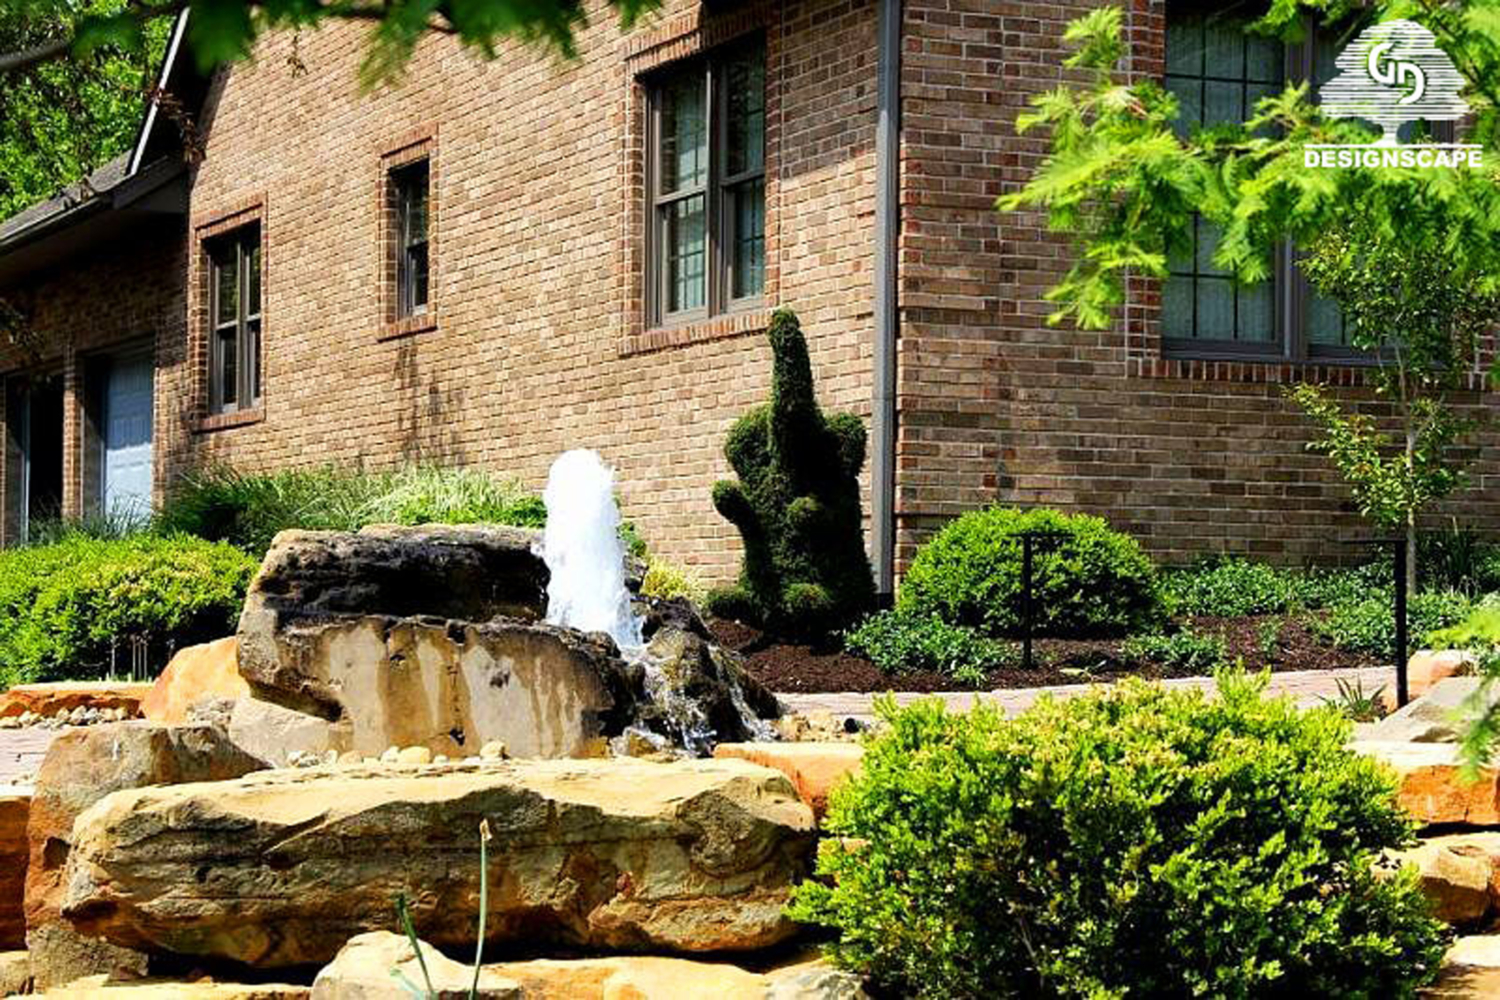 designscape, bloomington, hardscaping, design, water features, landscape architect, natural stone